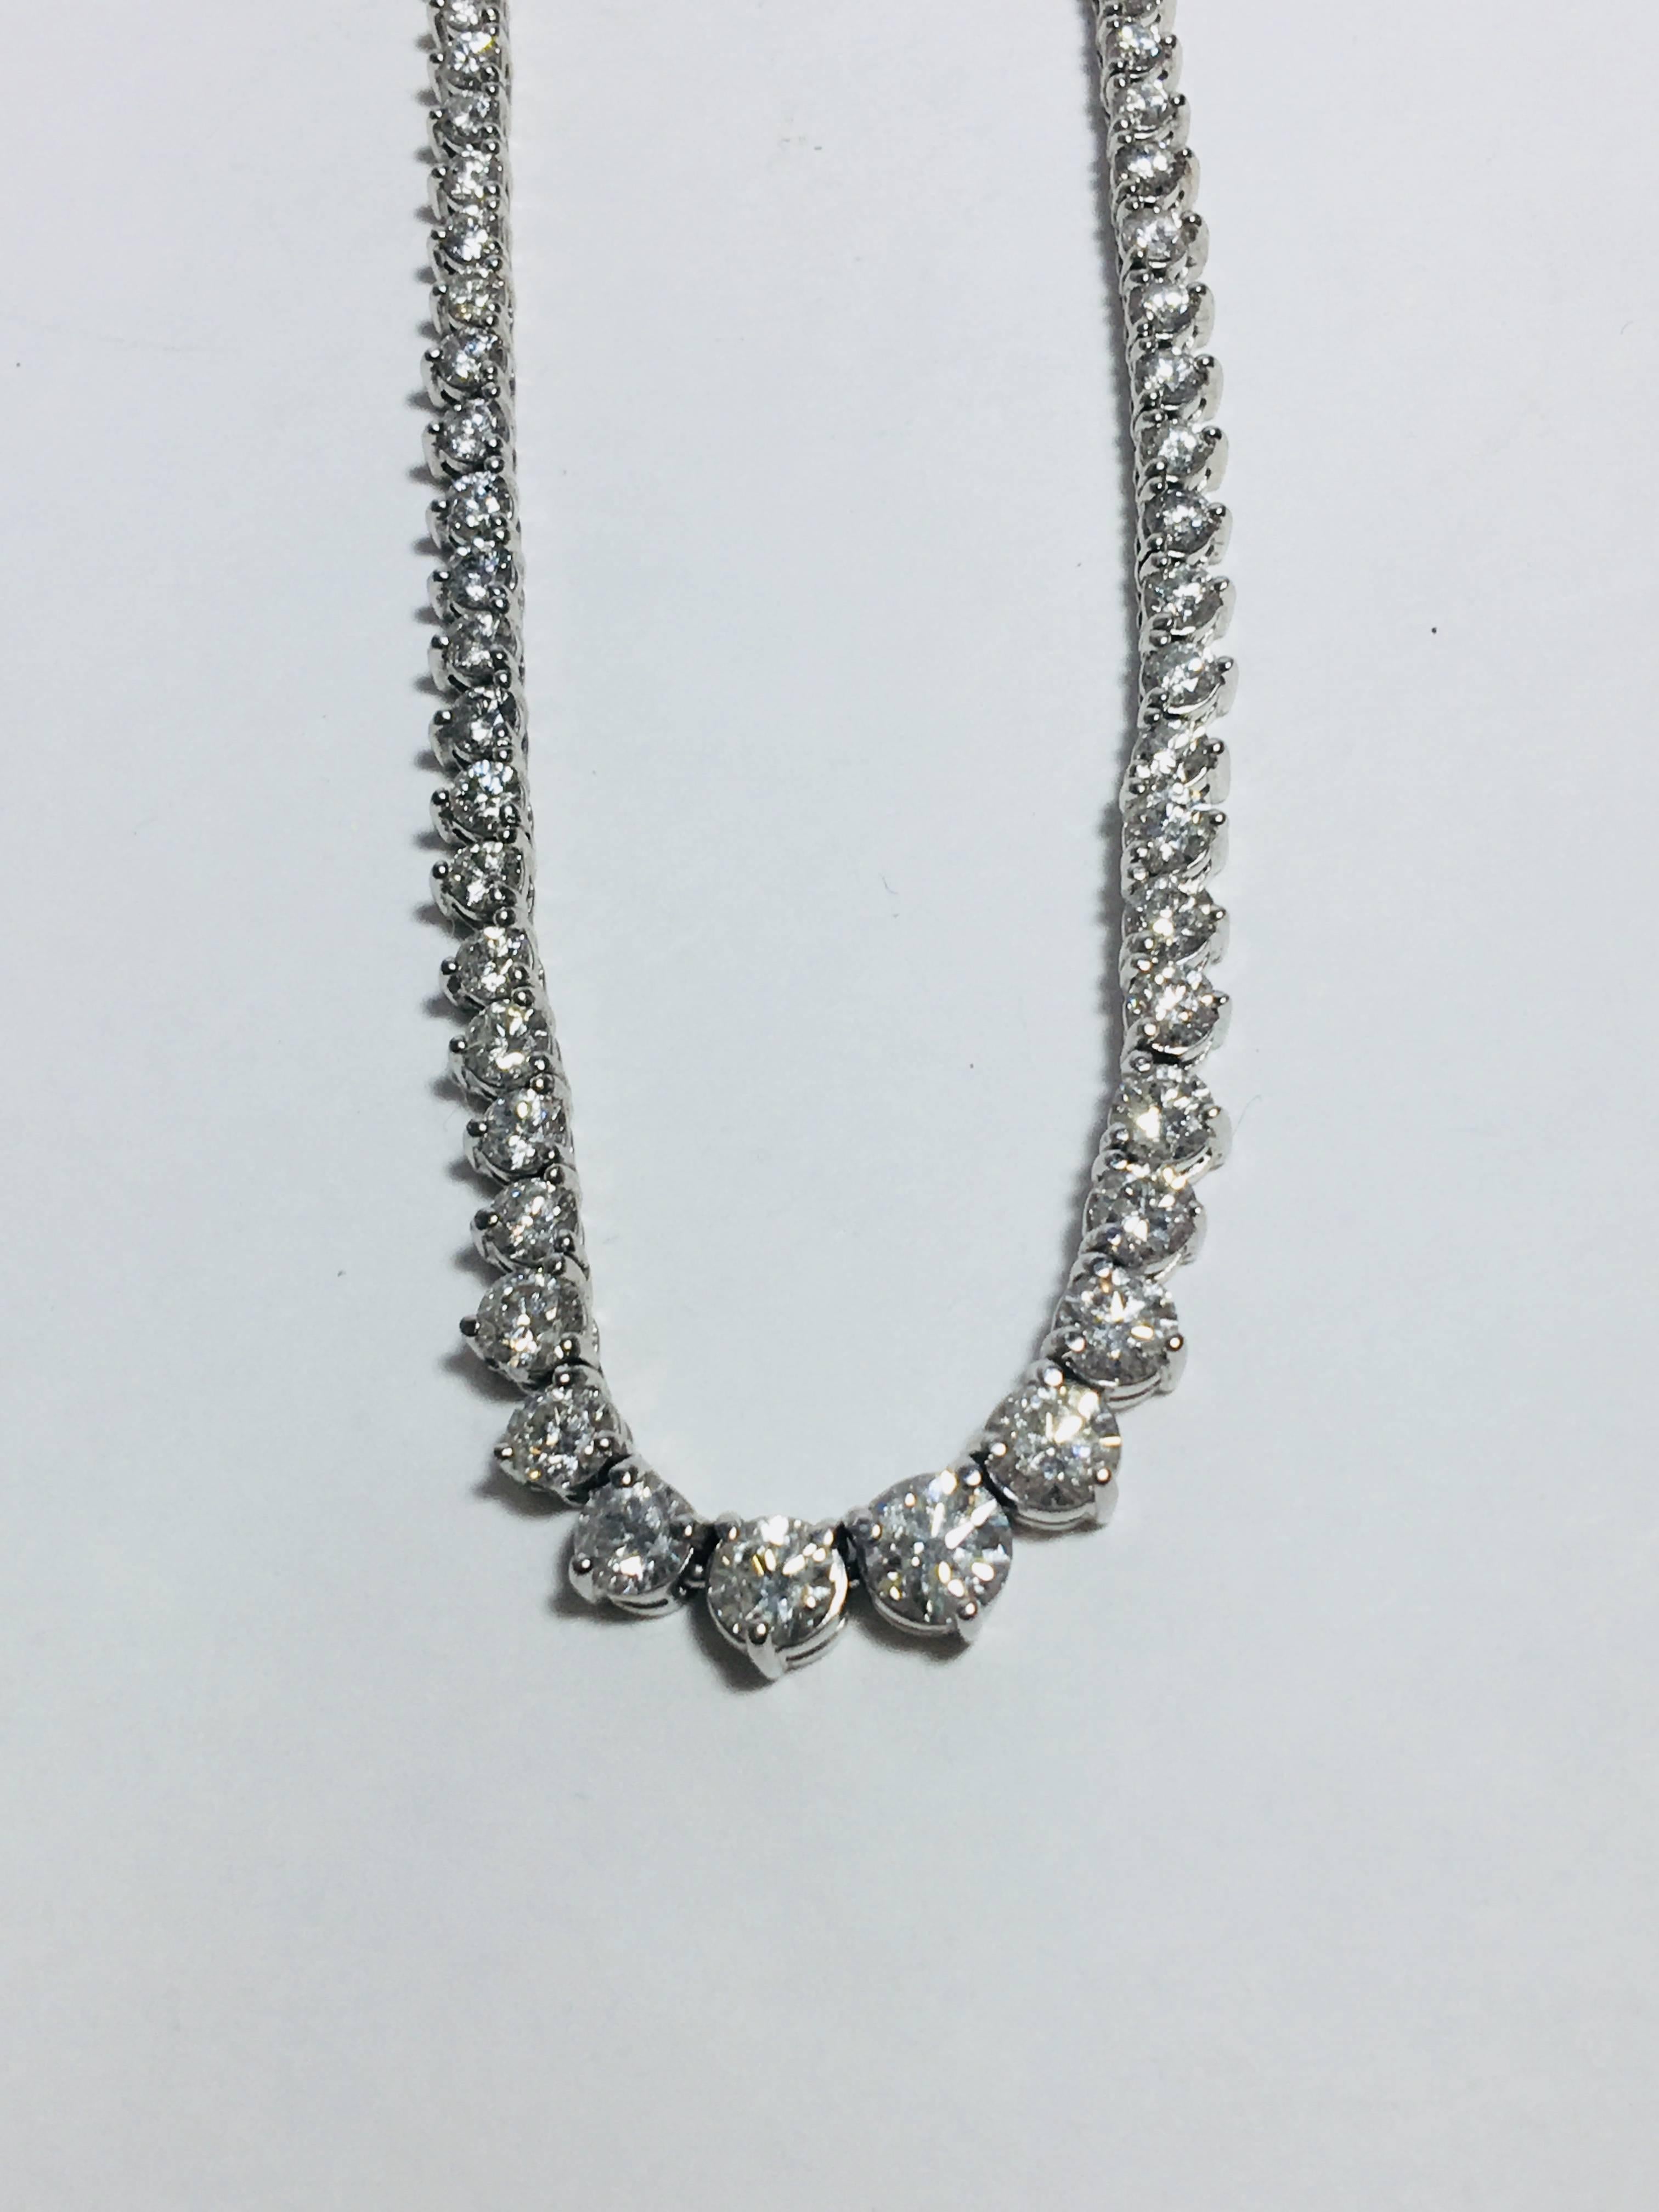 Lady's Diamond Riviera style Necklace containing one hundred fifty thirty five round Brilliant Cut Diamonds. The graduated Sixteen inch long by 5.2 x 2.5 Millimeter Wide Riviera style necklace utilizes 135 three prong set round brilliant cut